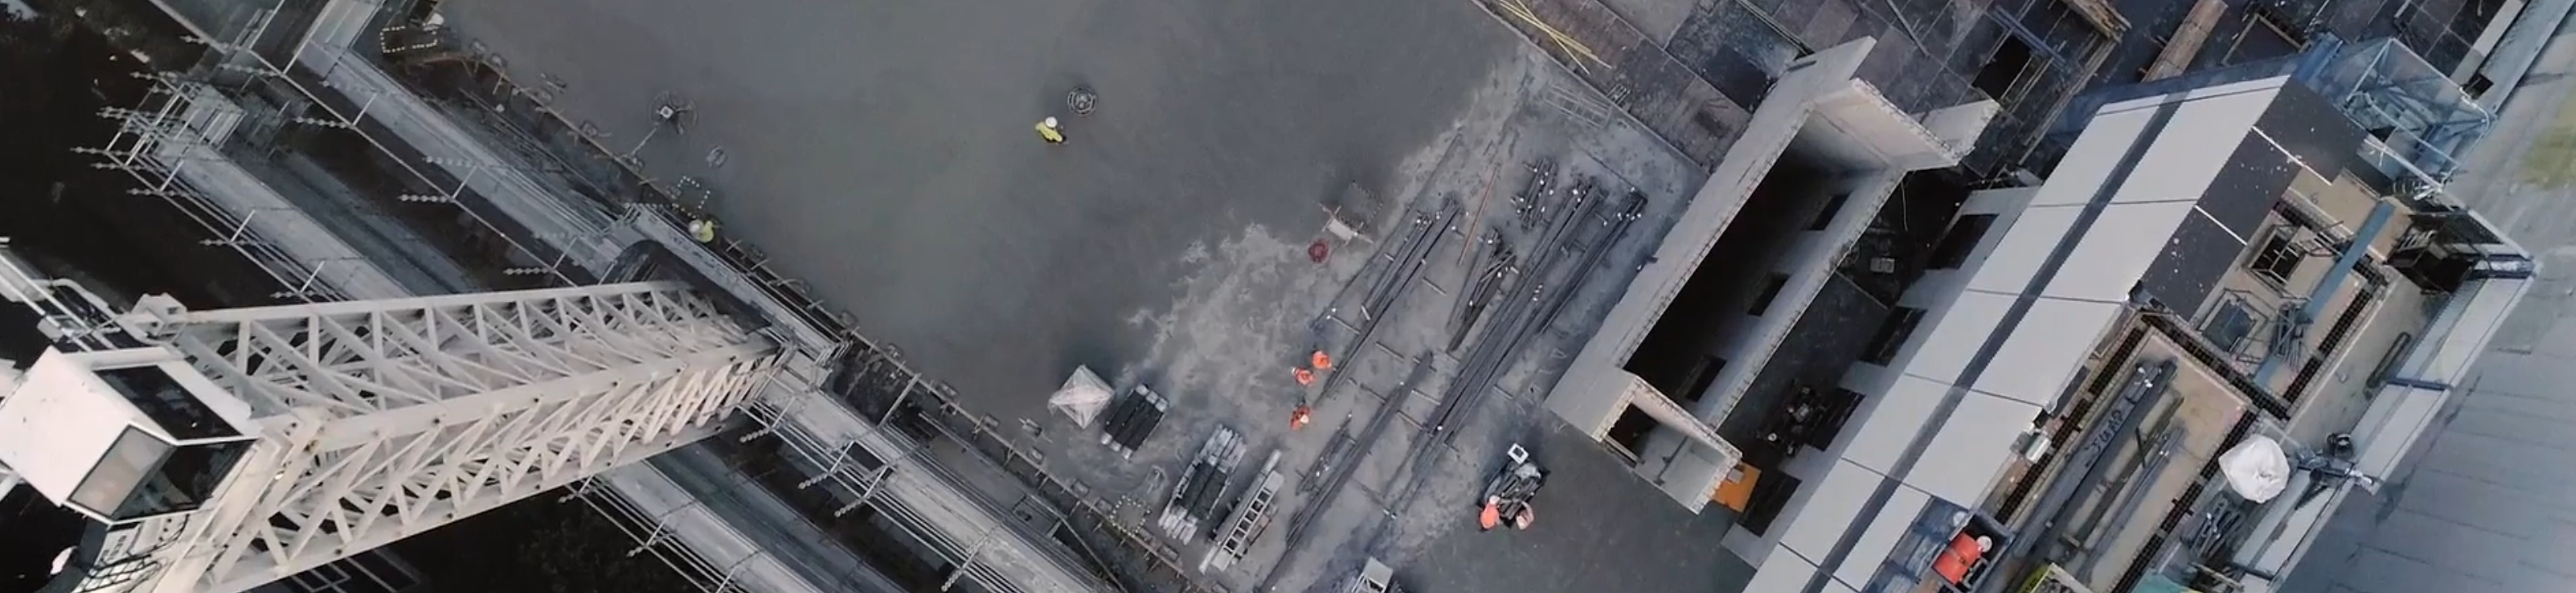 Overhead shot of construction zone